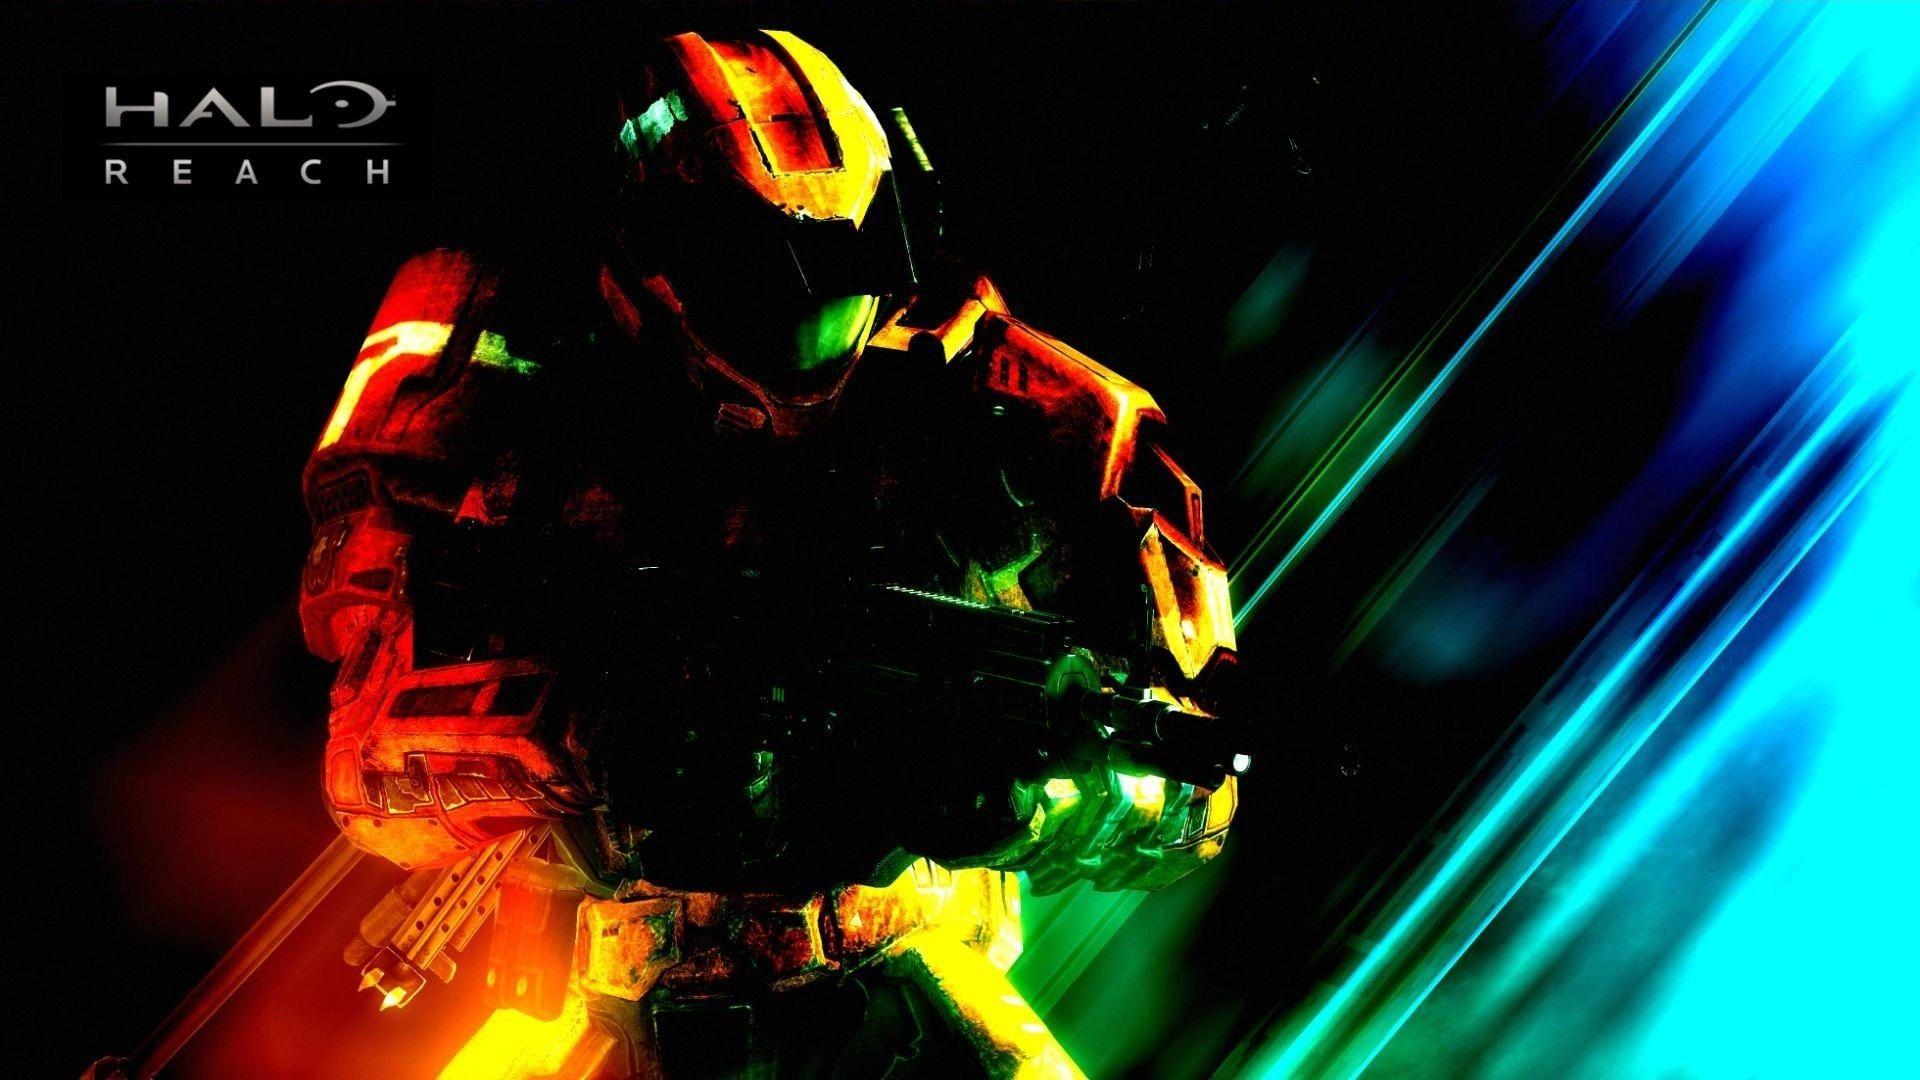 Halo reach xbox 360 game wallpapers